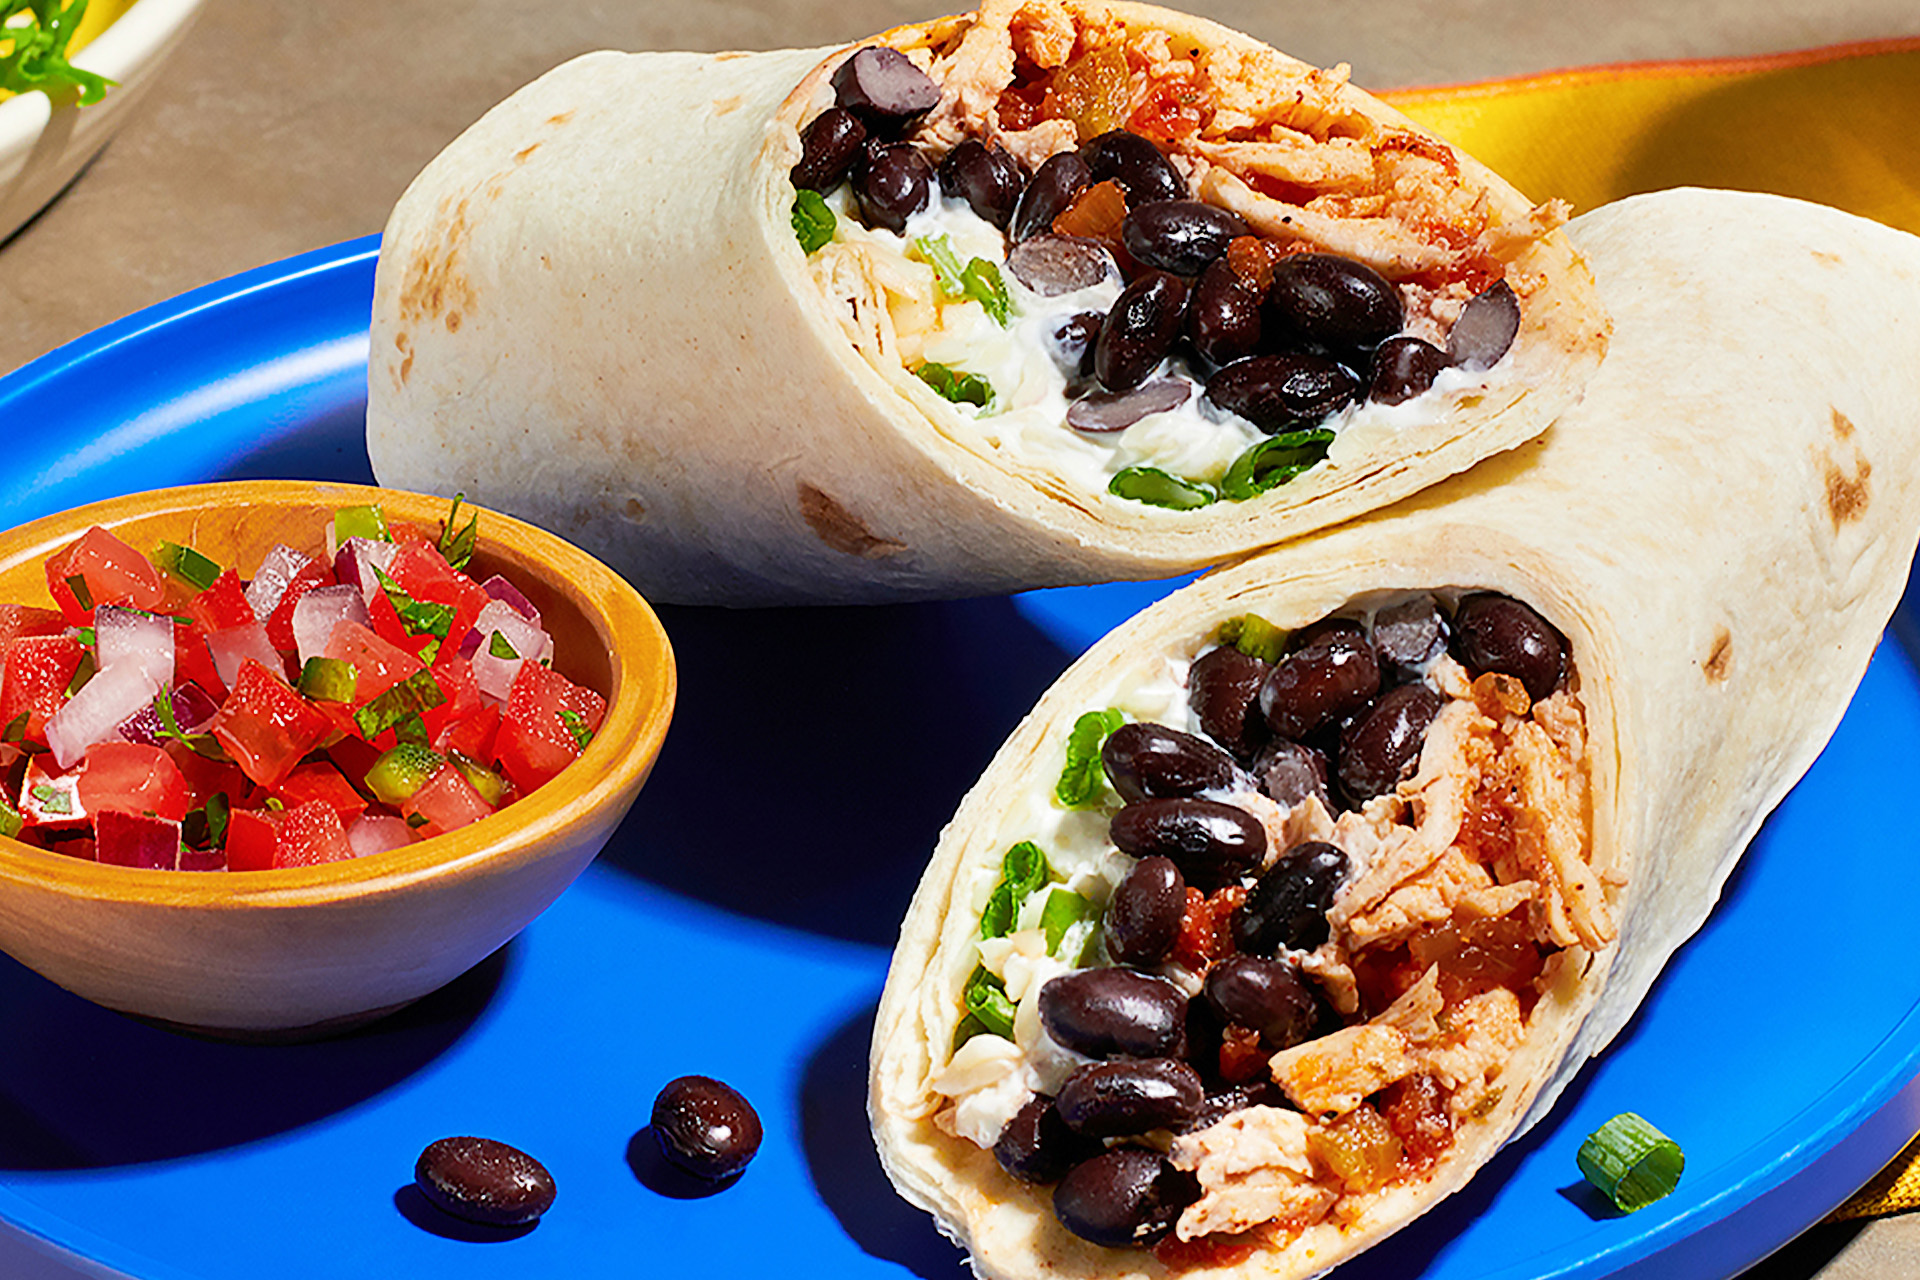 A chicken and black bean burrito sliced in half on a blue plate with small bowl of tomato salsa